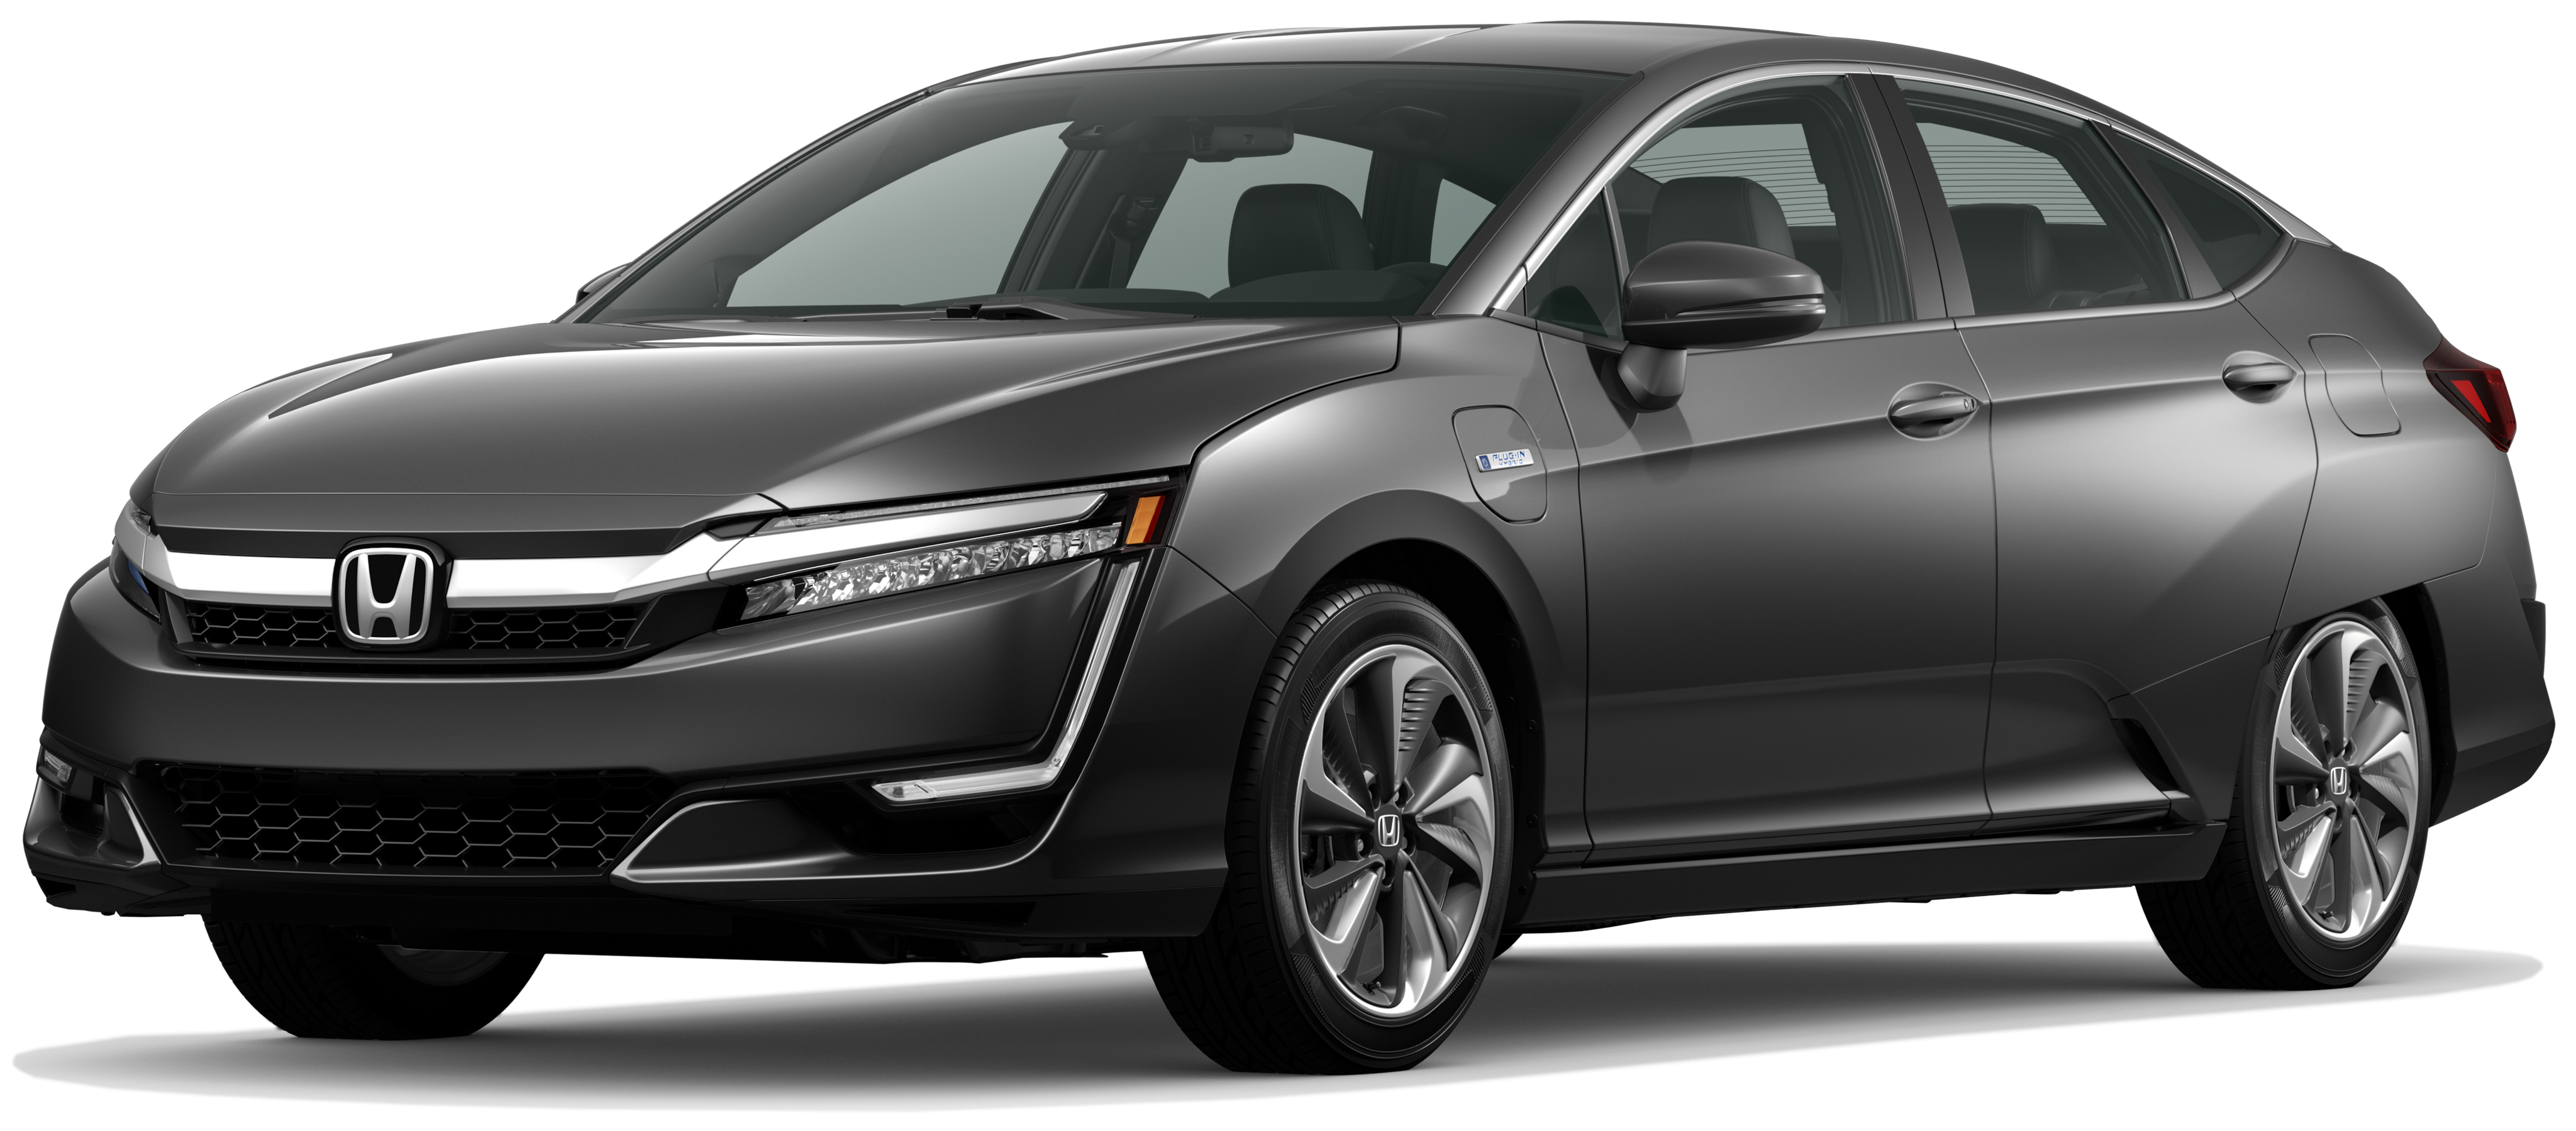 Honda Clarity Plug In Hybrid Incentives Specials Offers In South Charleston Wv